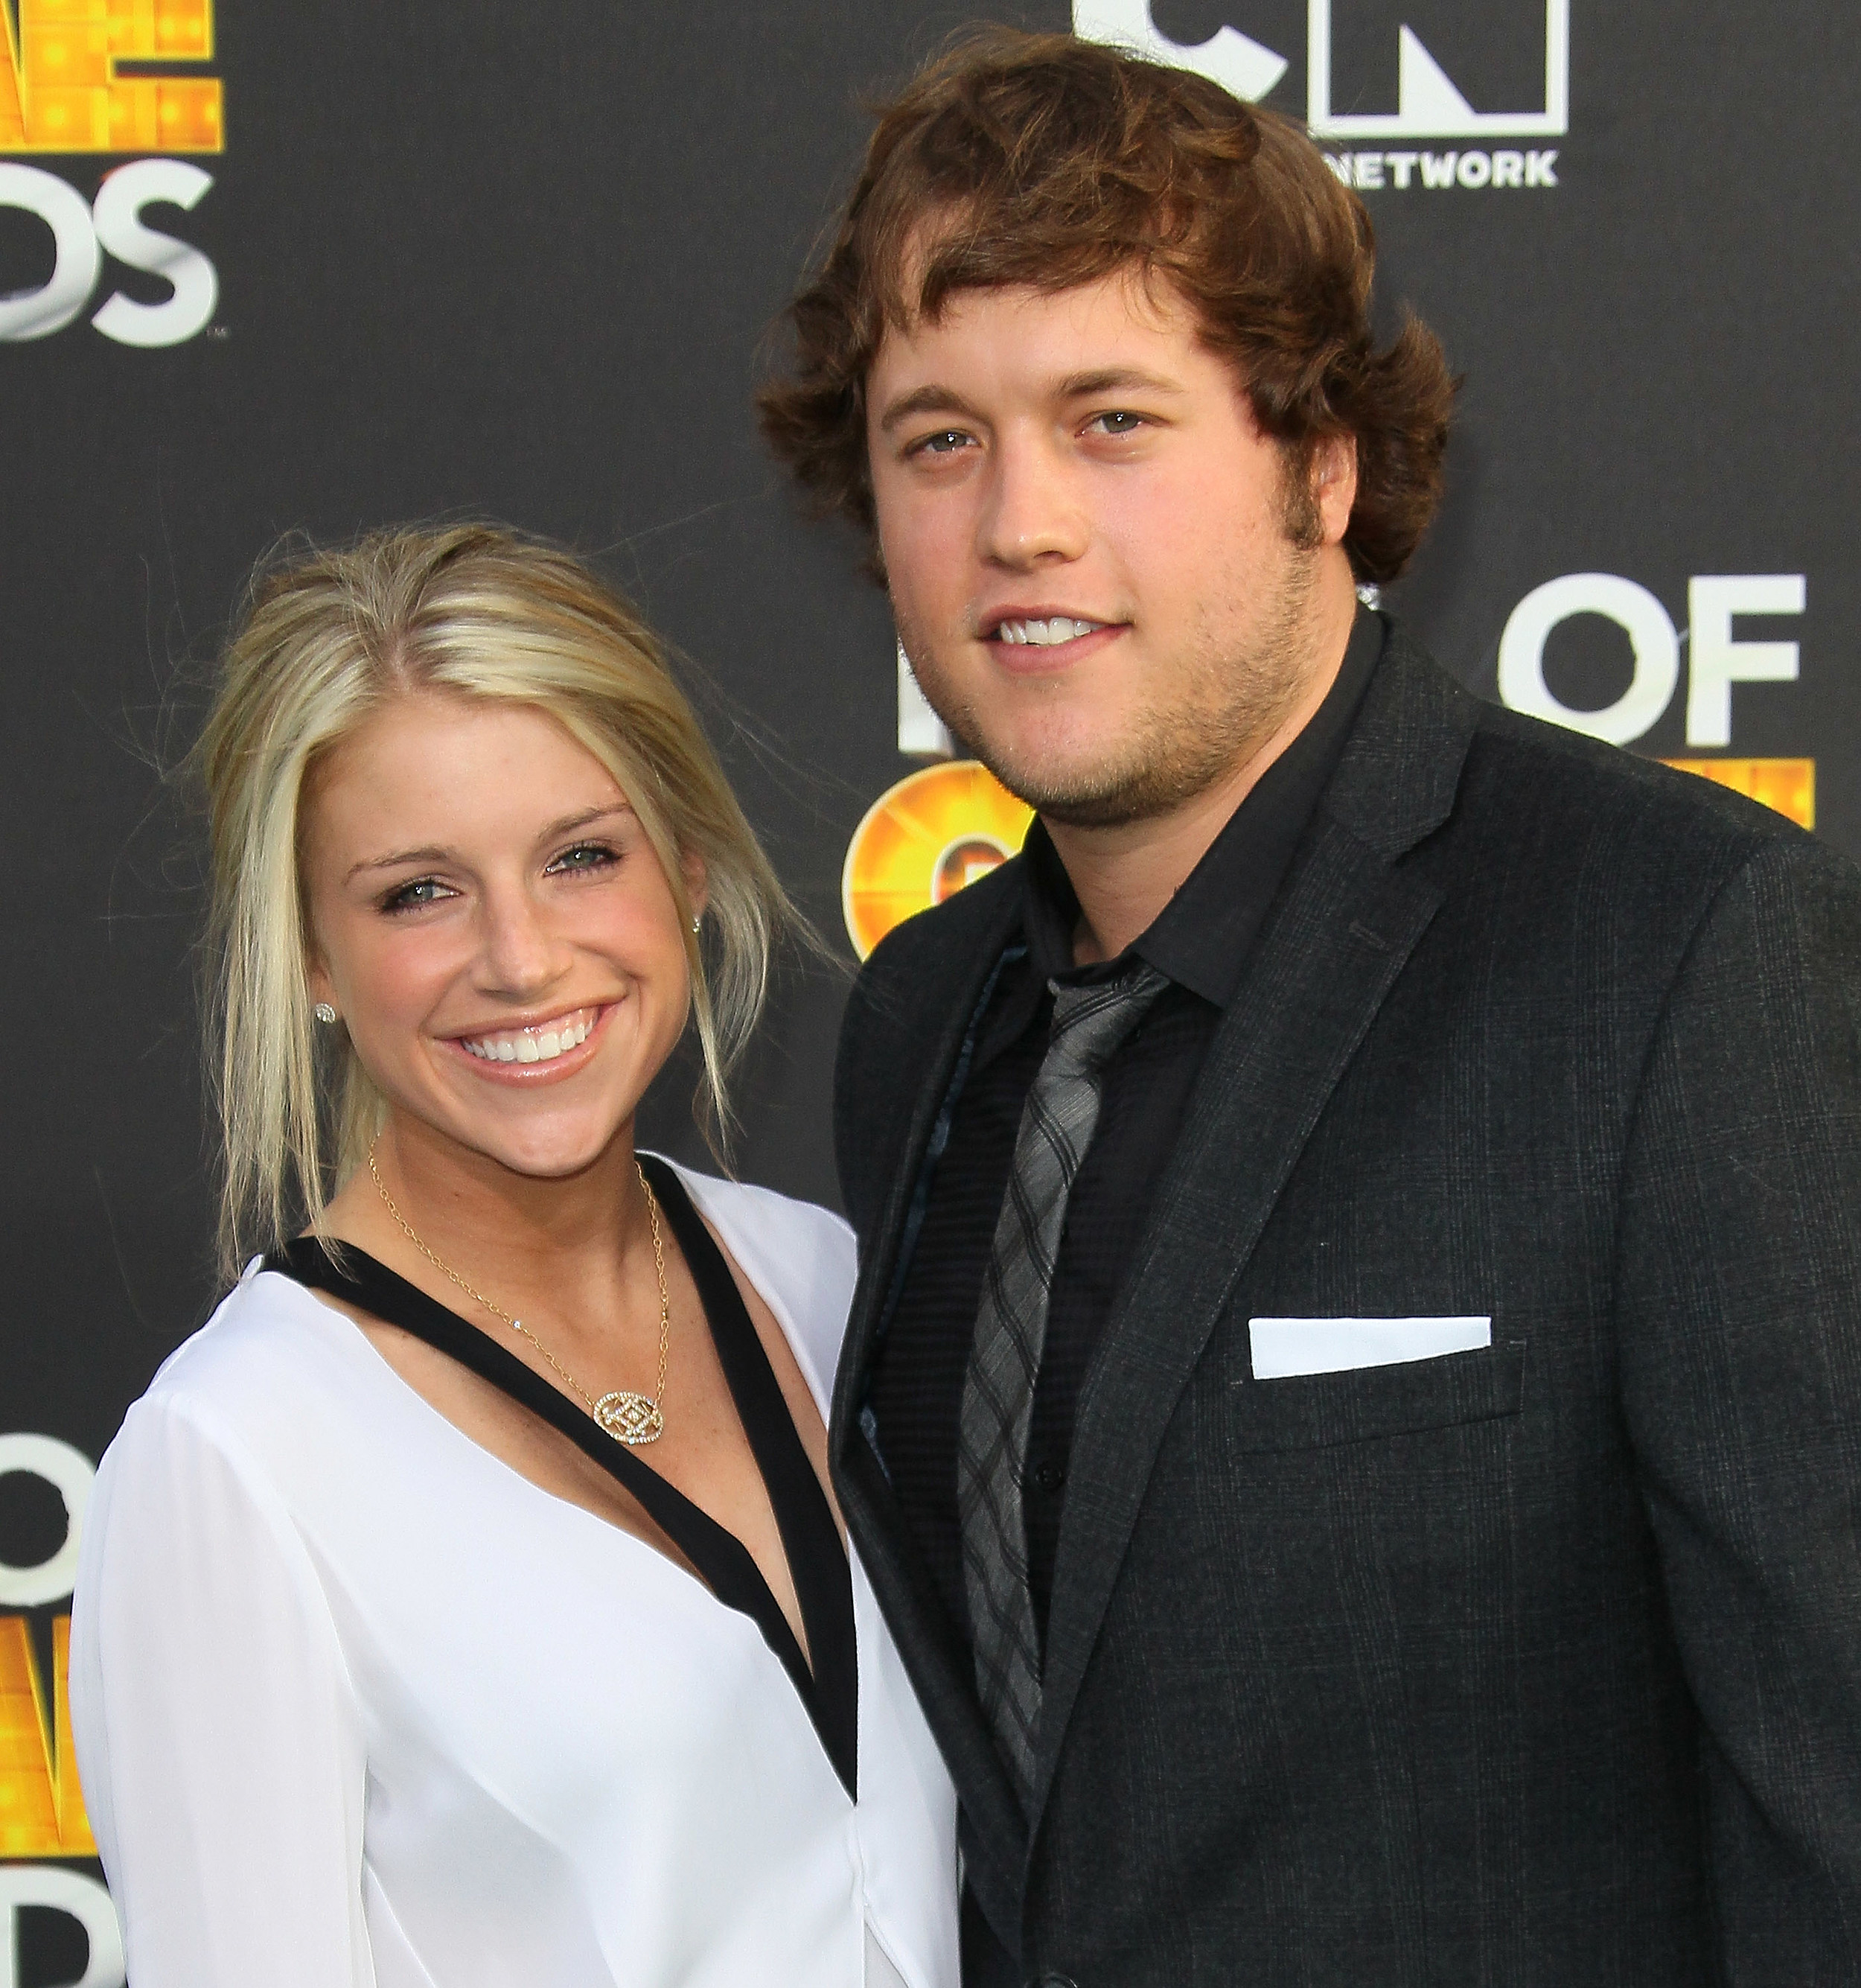 Matthew Stafford's Wife Kelly Stafford Is Hoping for Rams Win